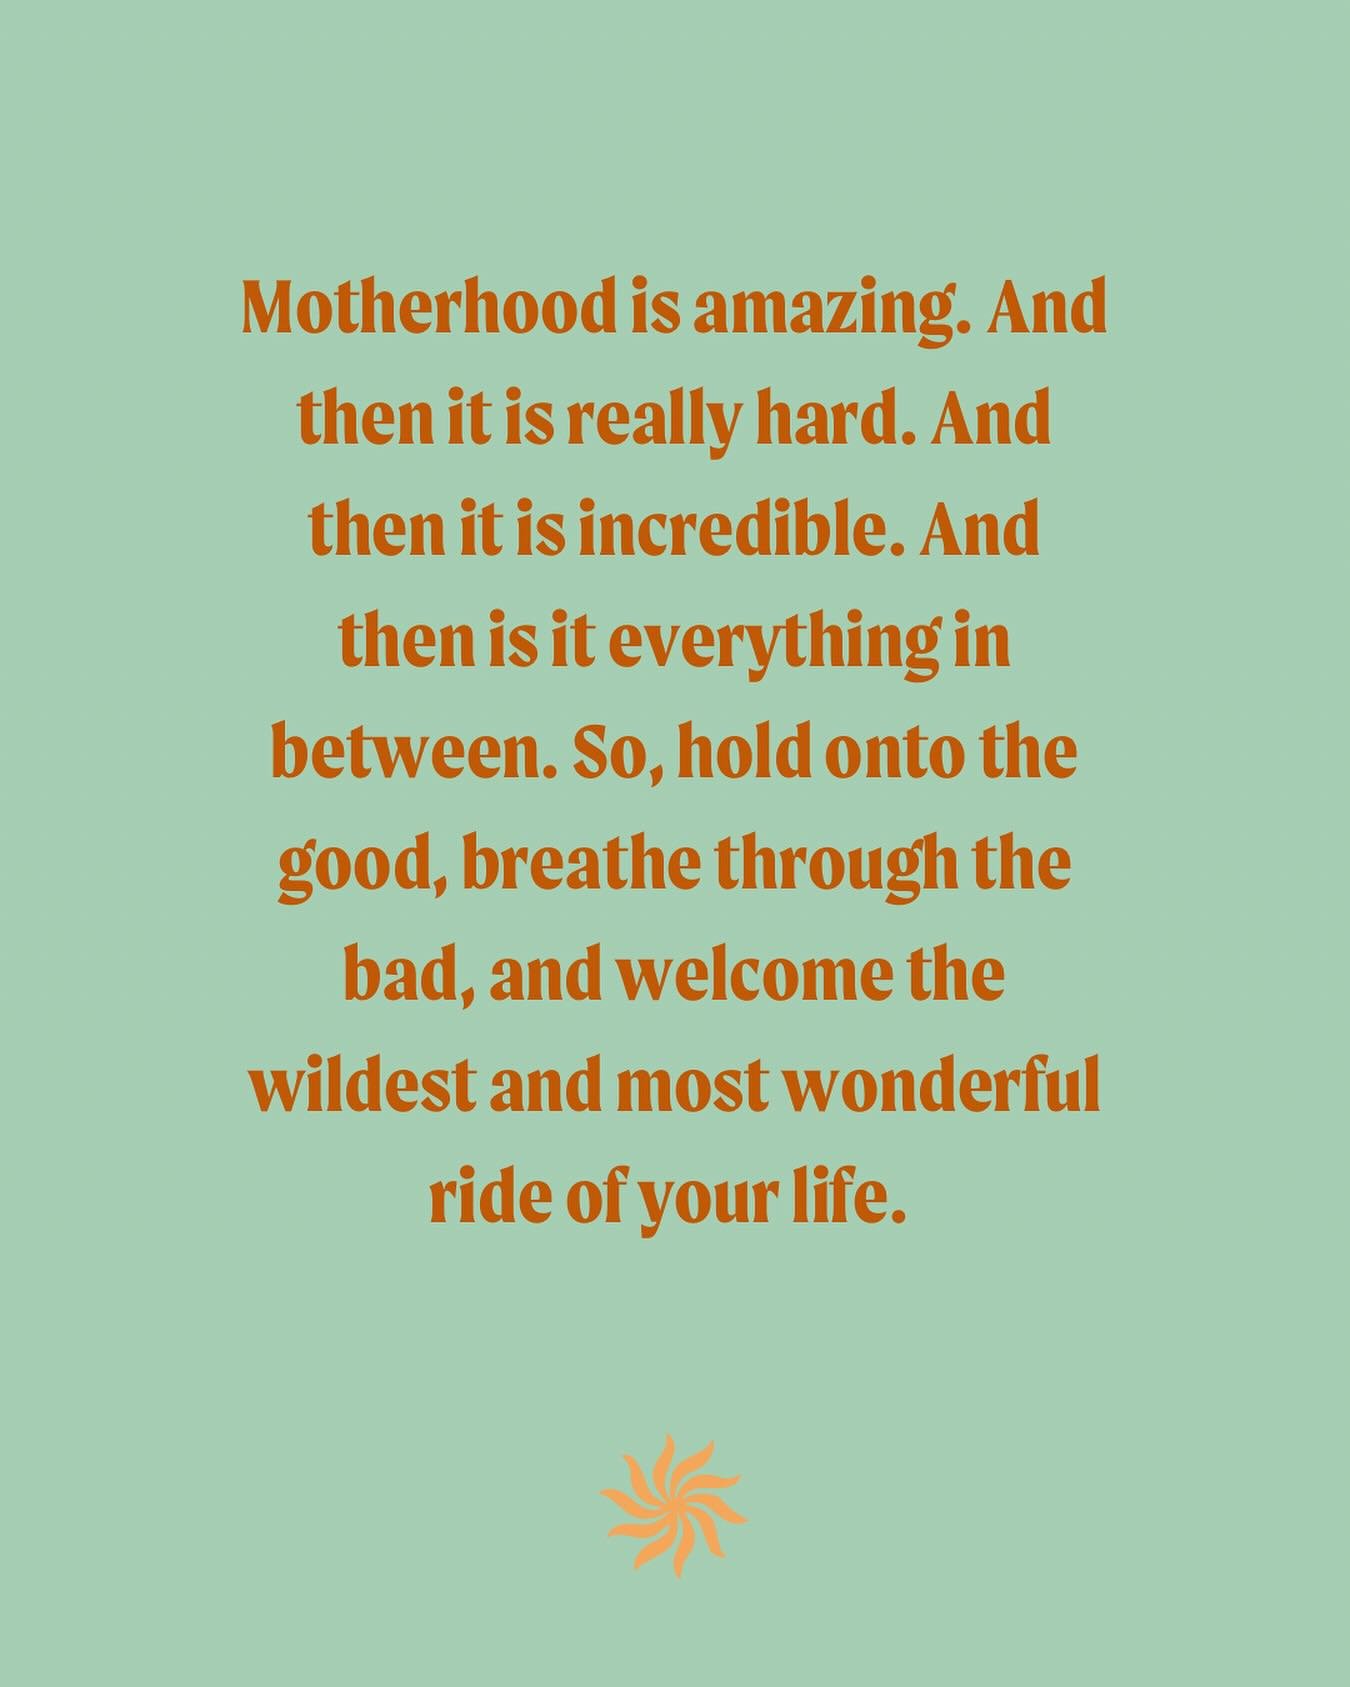 What words or wisdom would you share with your past self entering motherhood? 

#motherhood #parentsupport #supportingmothers #empoweringmothers #wordsofwisdom #supporteachother #wordsofsupport